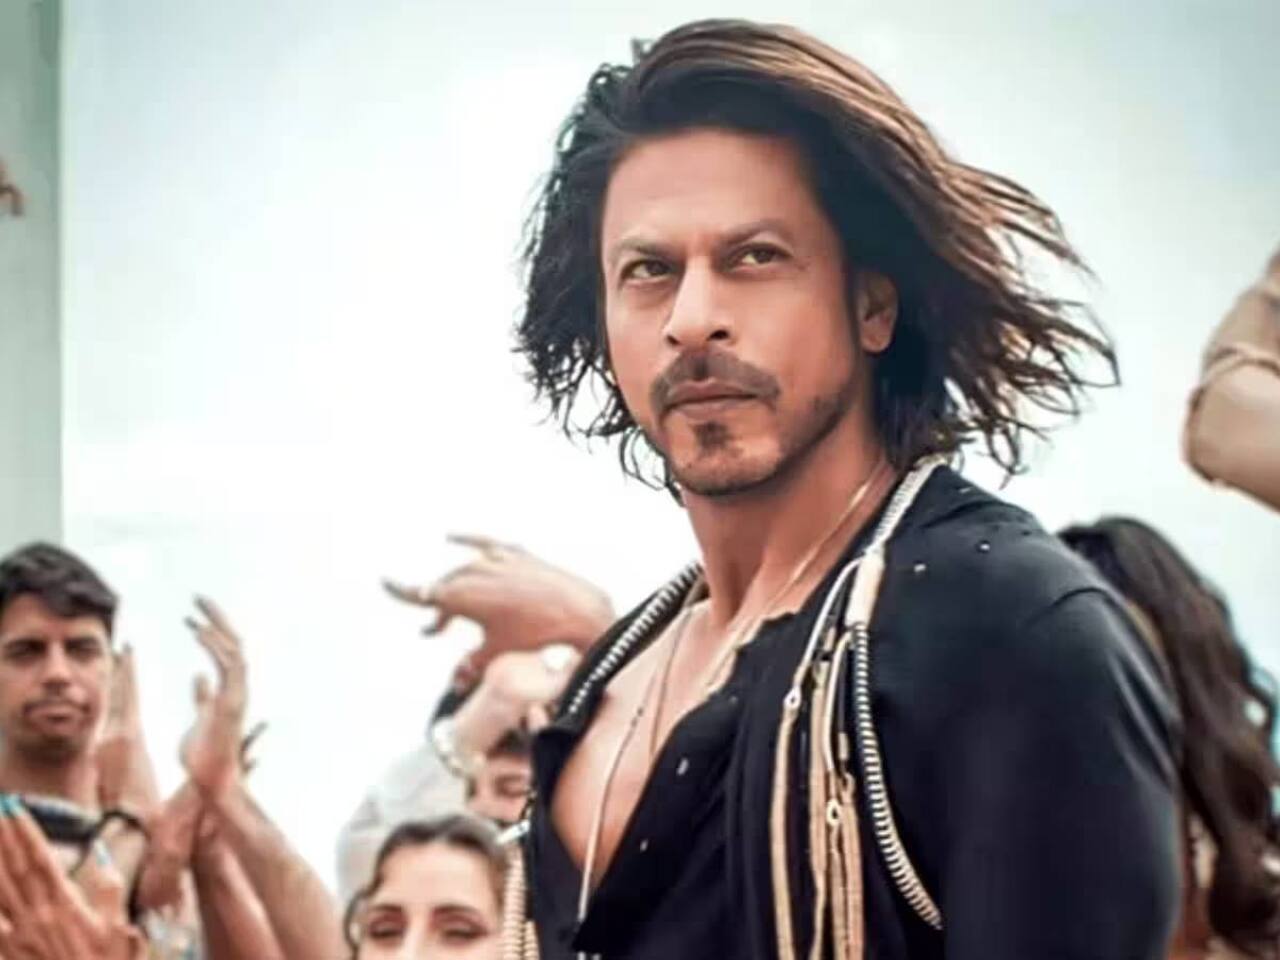 While Pathaan breaks biggest box office records; netizens highlight faults in Shah Rukh Khan film